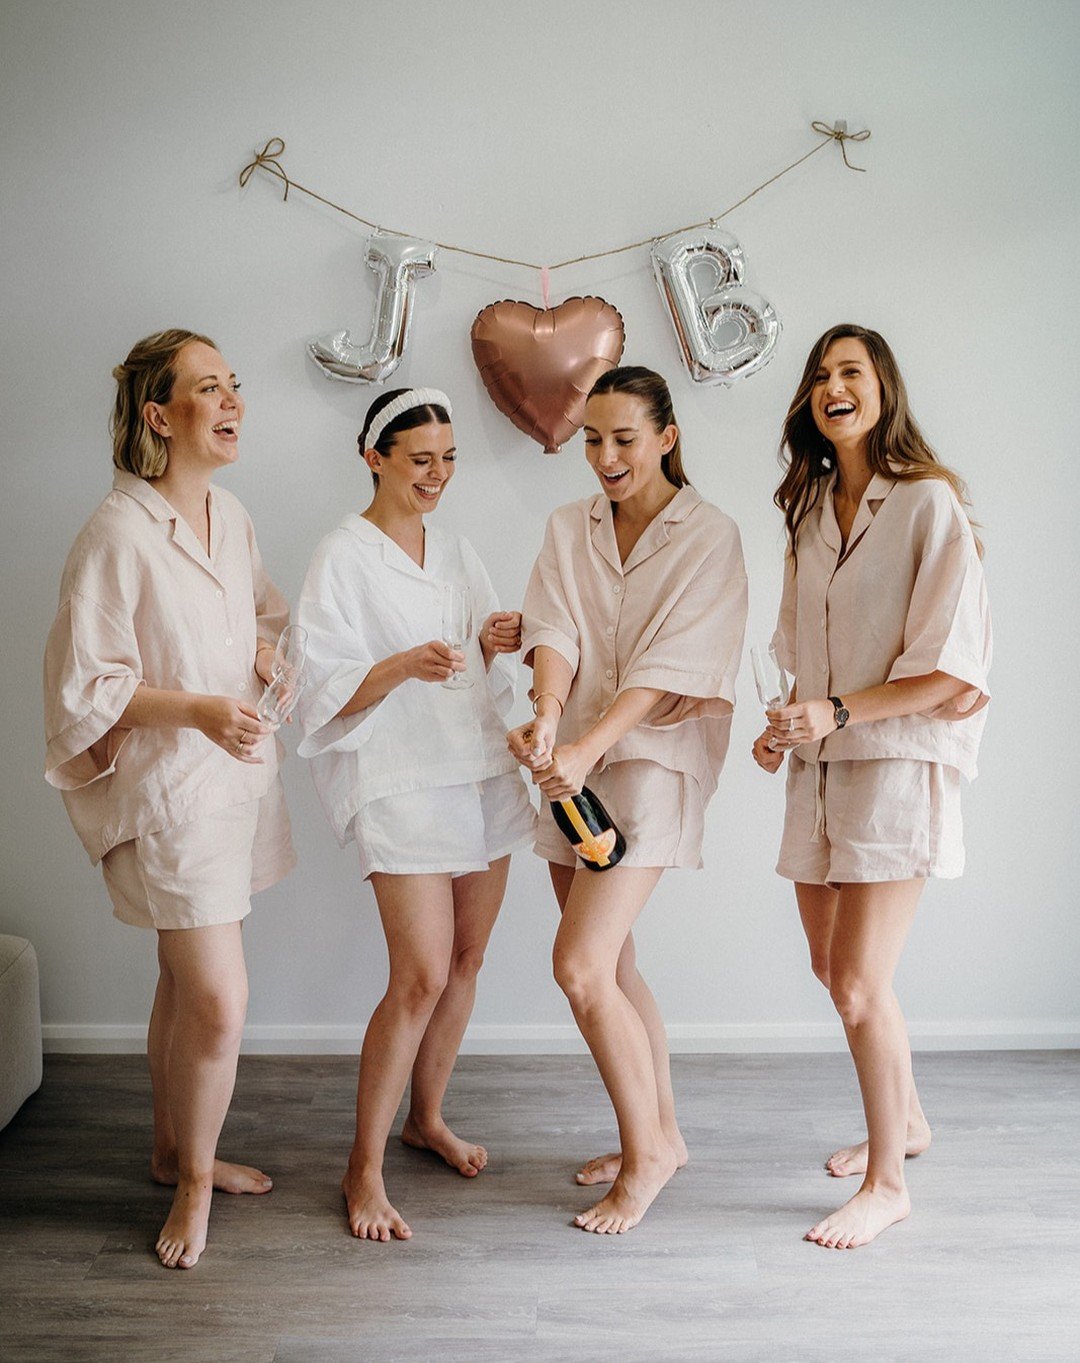 ☀️ Behind the scenes of bridal prep: capturing the morning magic on video 💍✨it's all part of the fun. Cheers to love, laughter, and unforgettable memories! 🥂❤️ #BridalPrep #MorningMagic Photo:@thephototrail